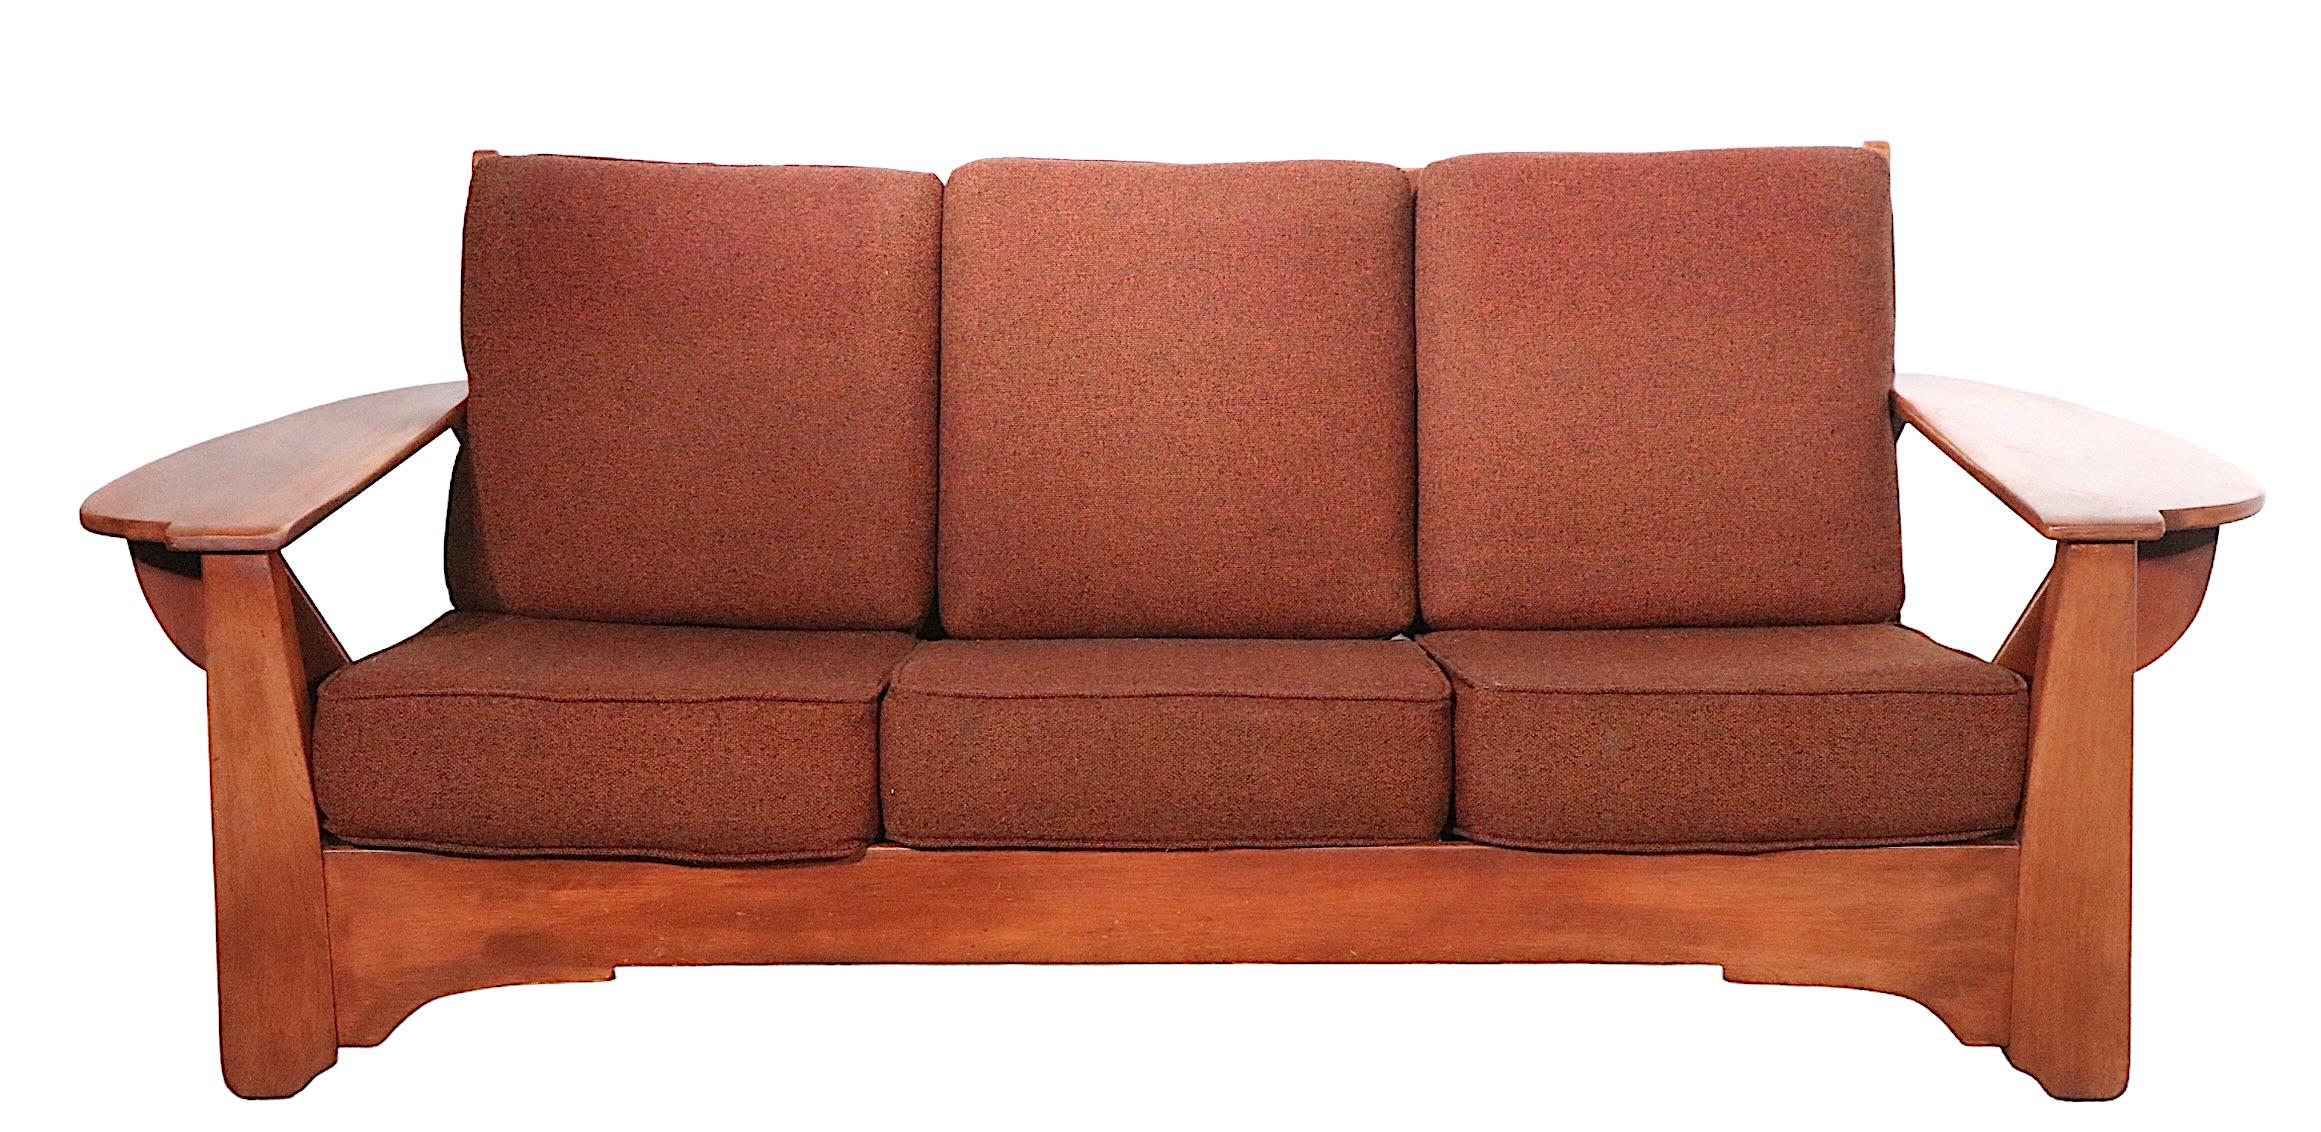 Paddle Arm Cushman Colonial Creations Sofa designed by Herman de Vries 1940s/50s 9